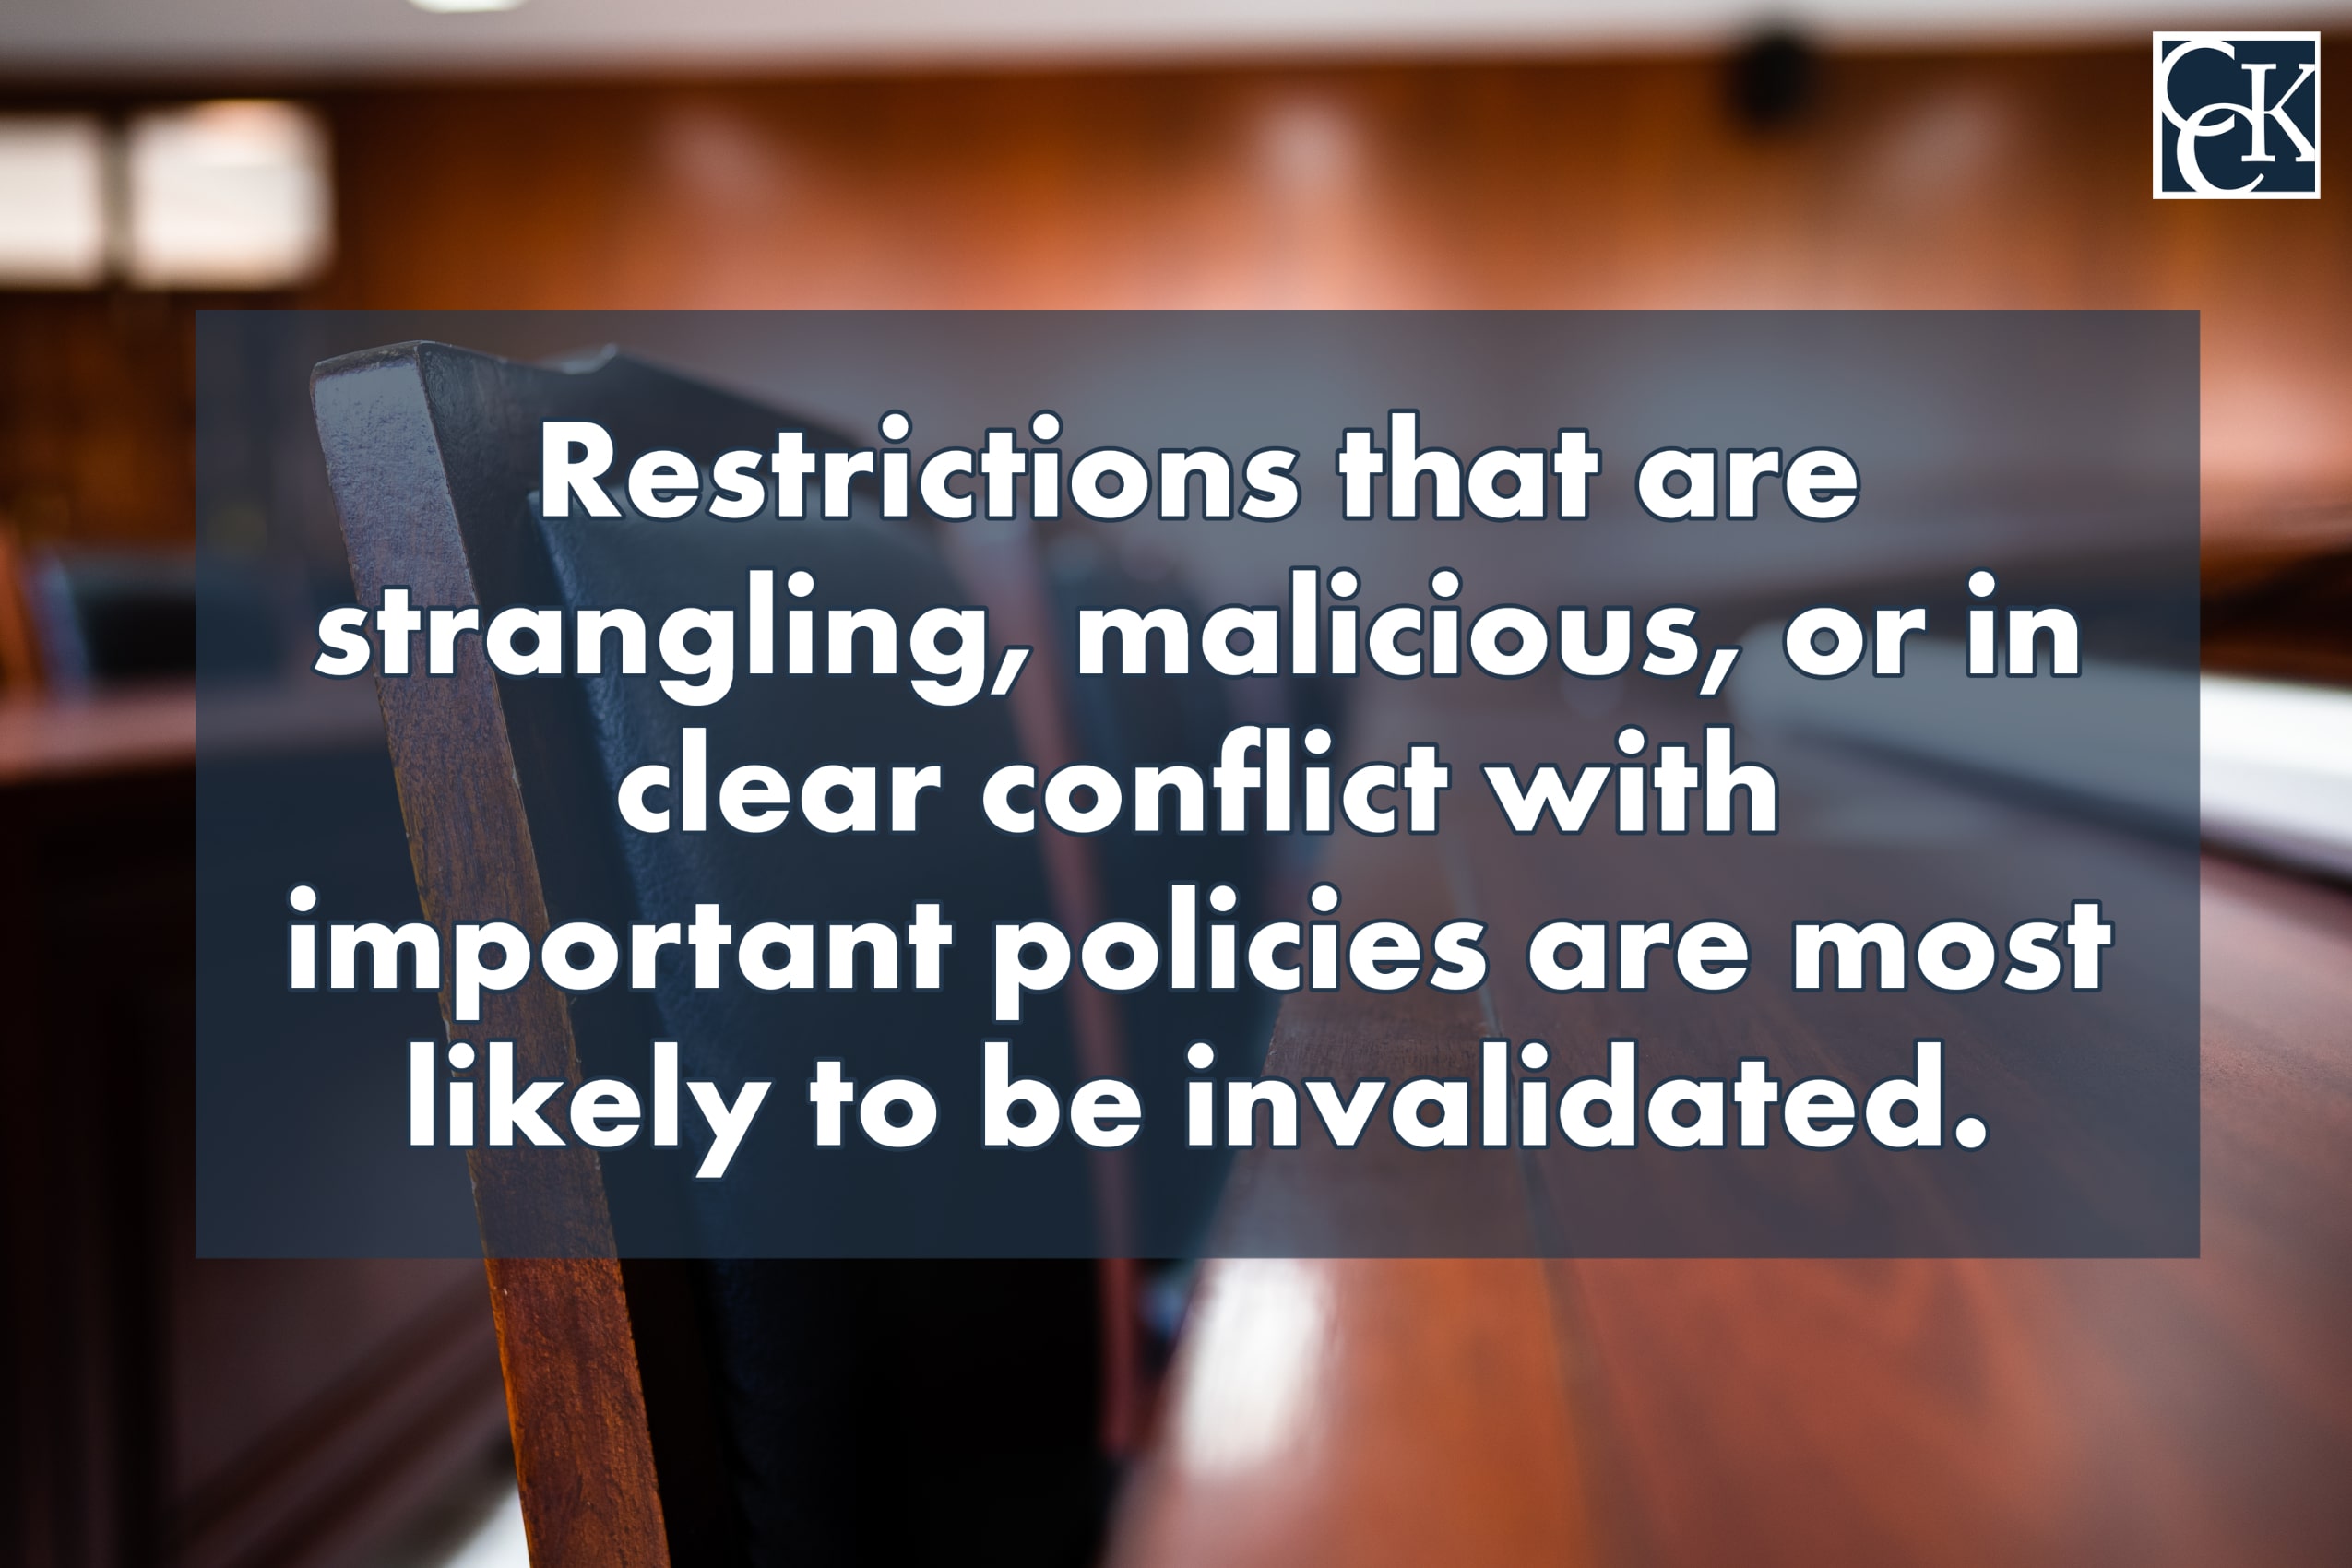 Restrictions that are strangling, malicious, or in clear conflict with important policies are most likely to be invalidated. 